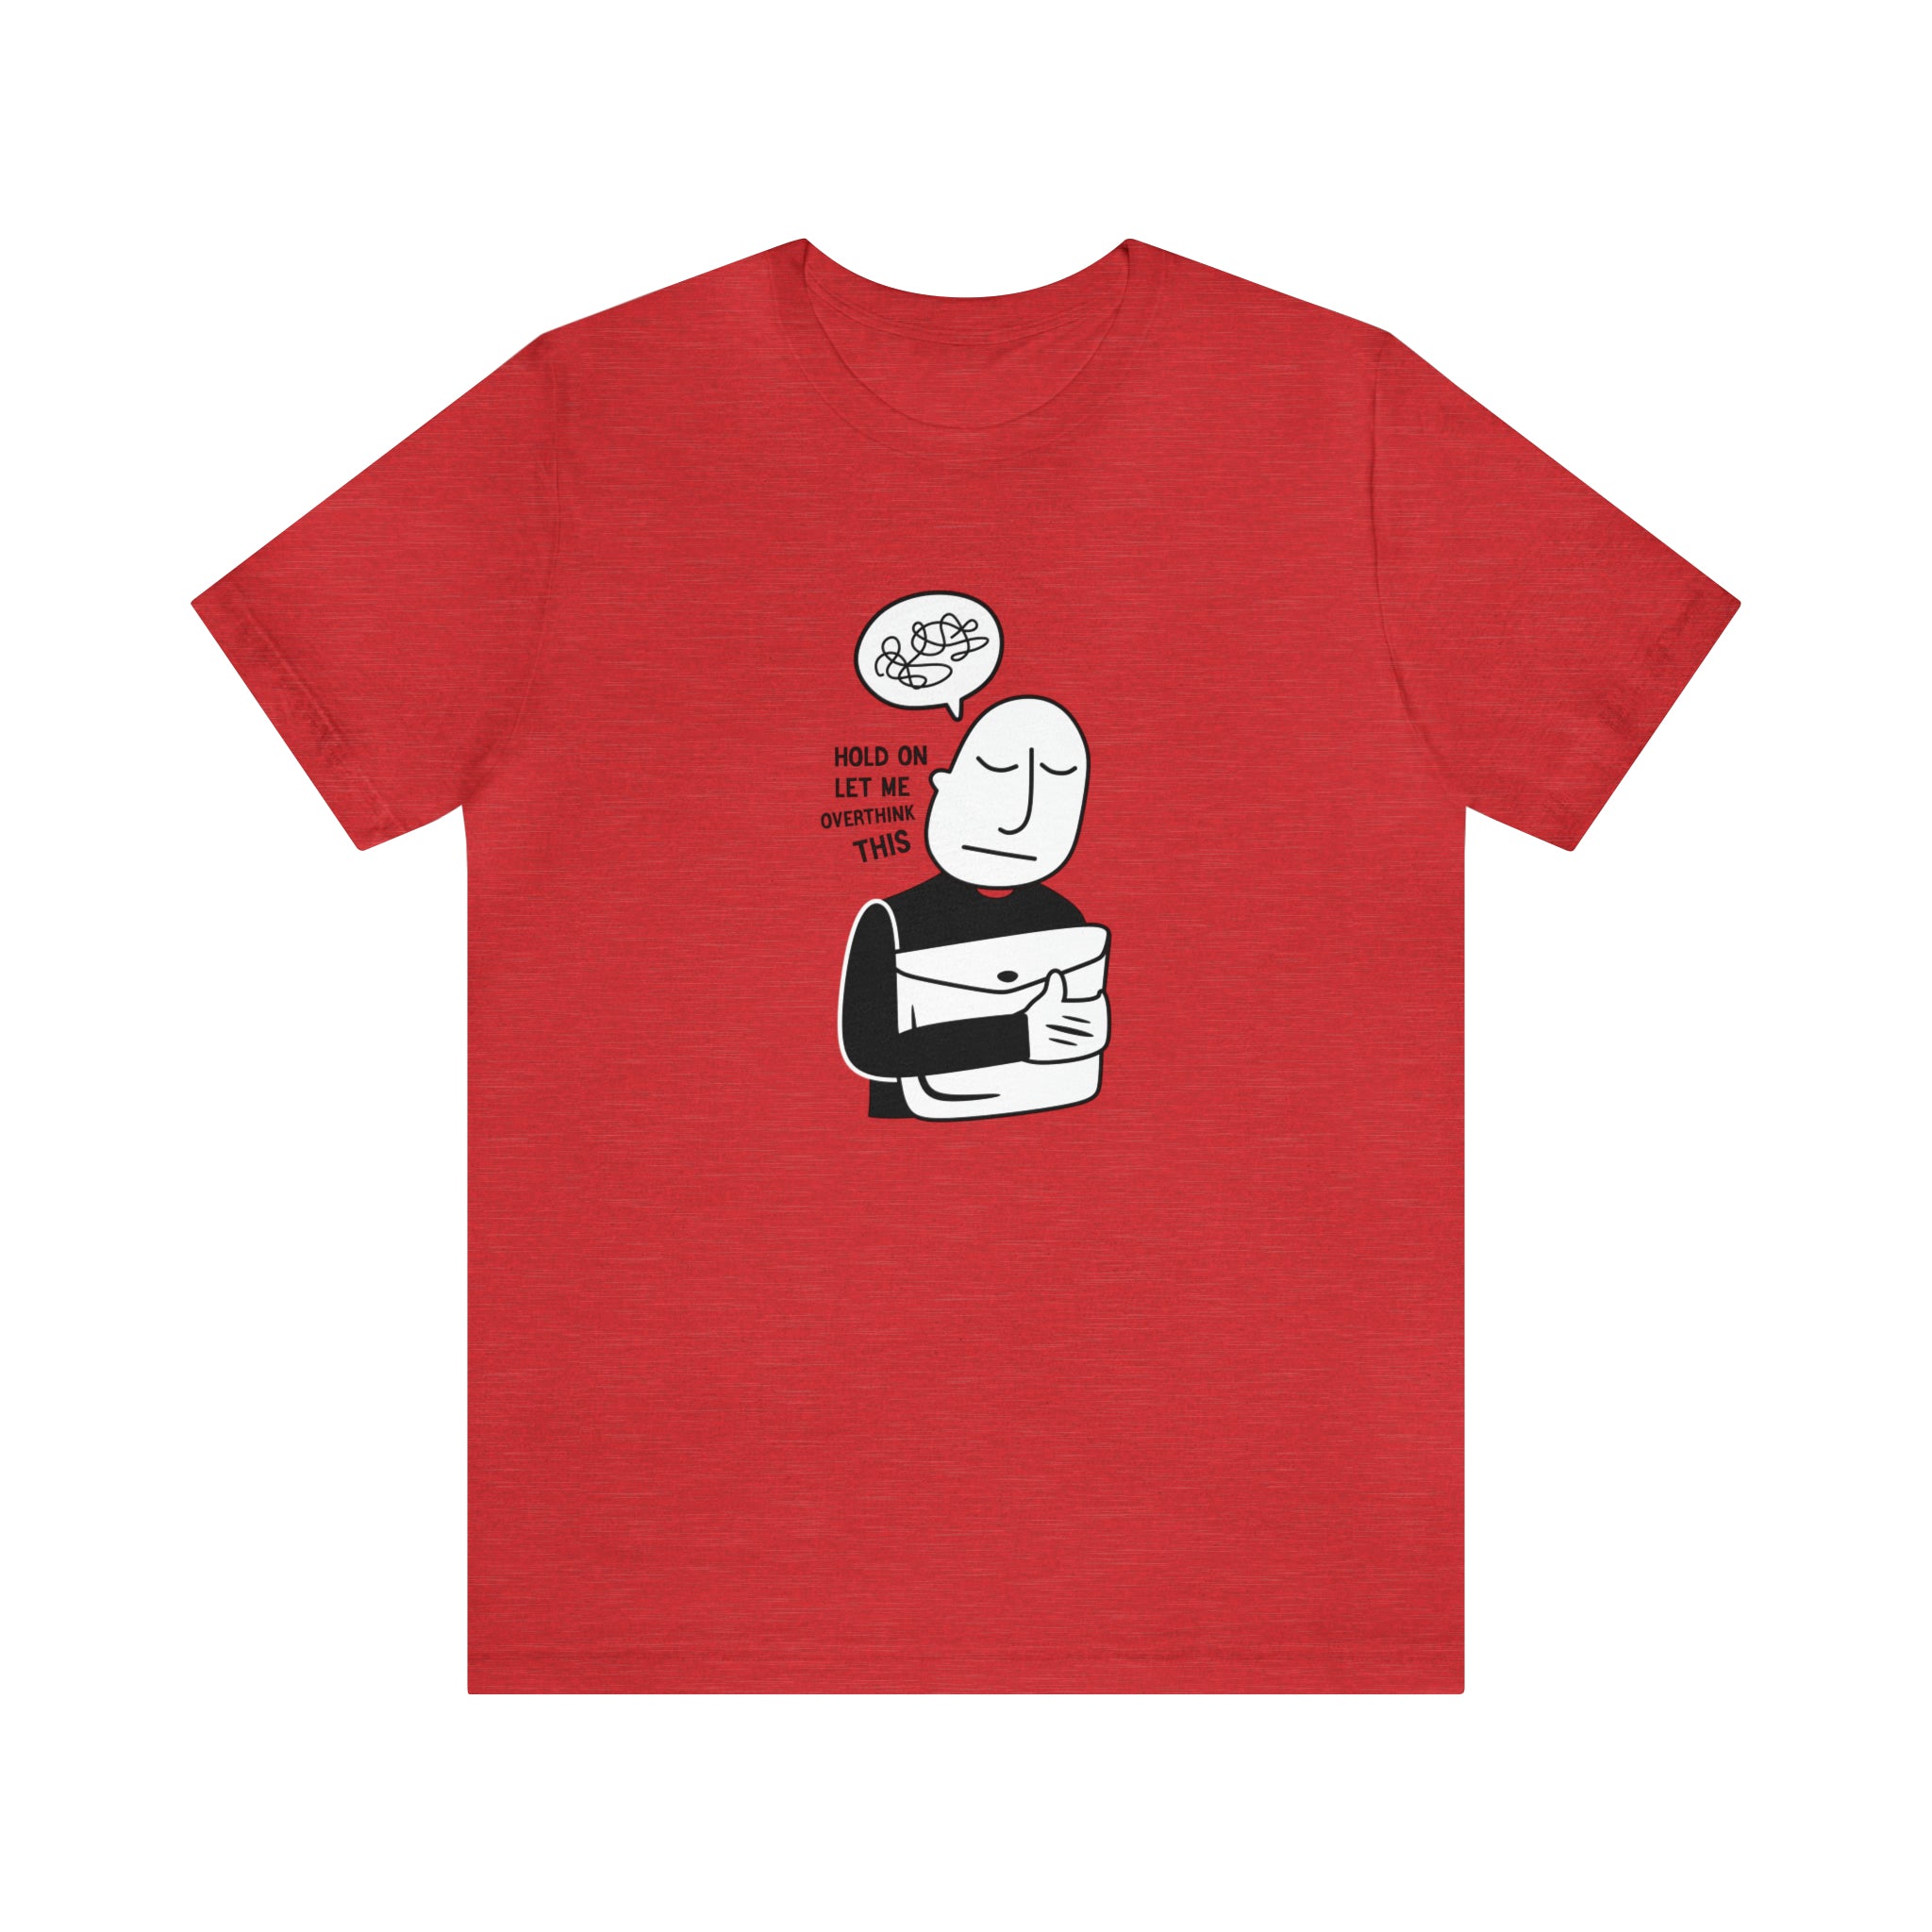 A red Hold On Let Me Overthink This T-shirt with a cartoon design.